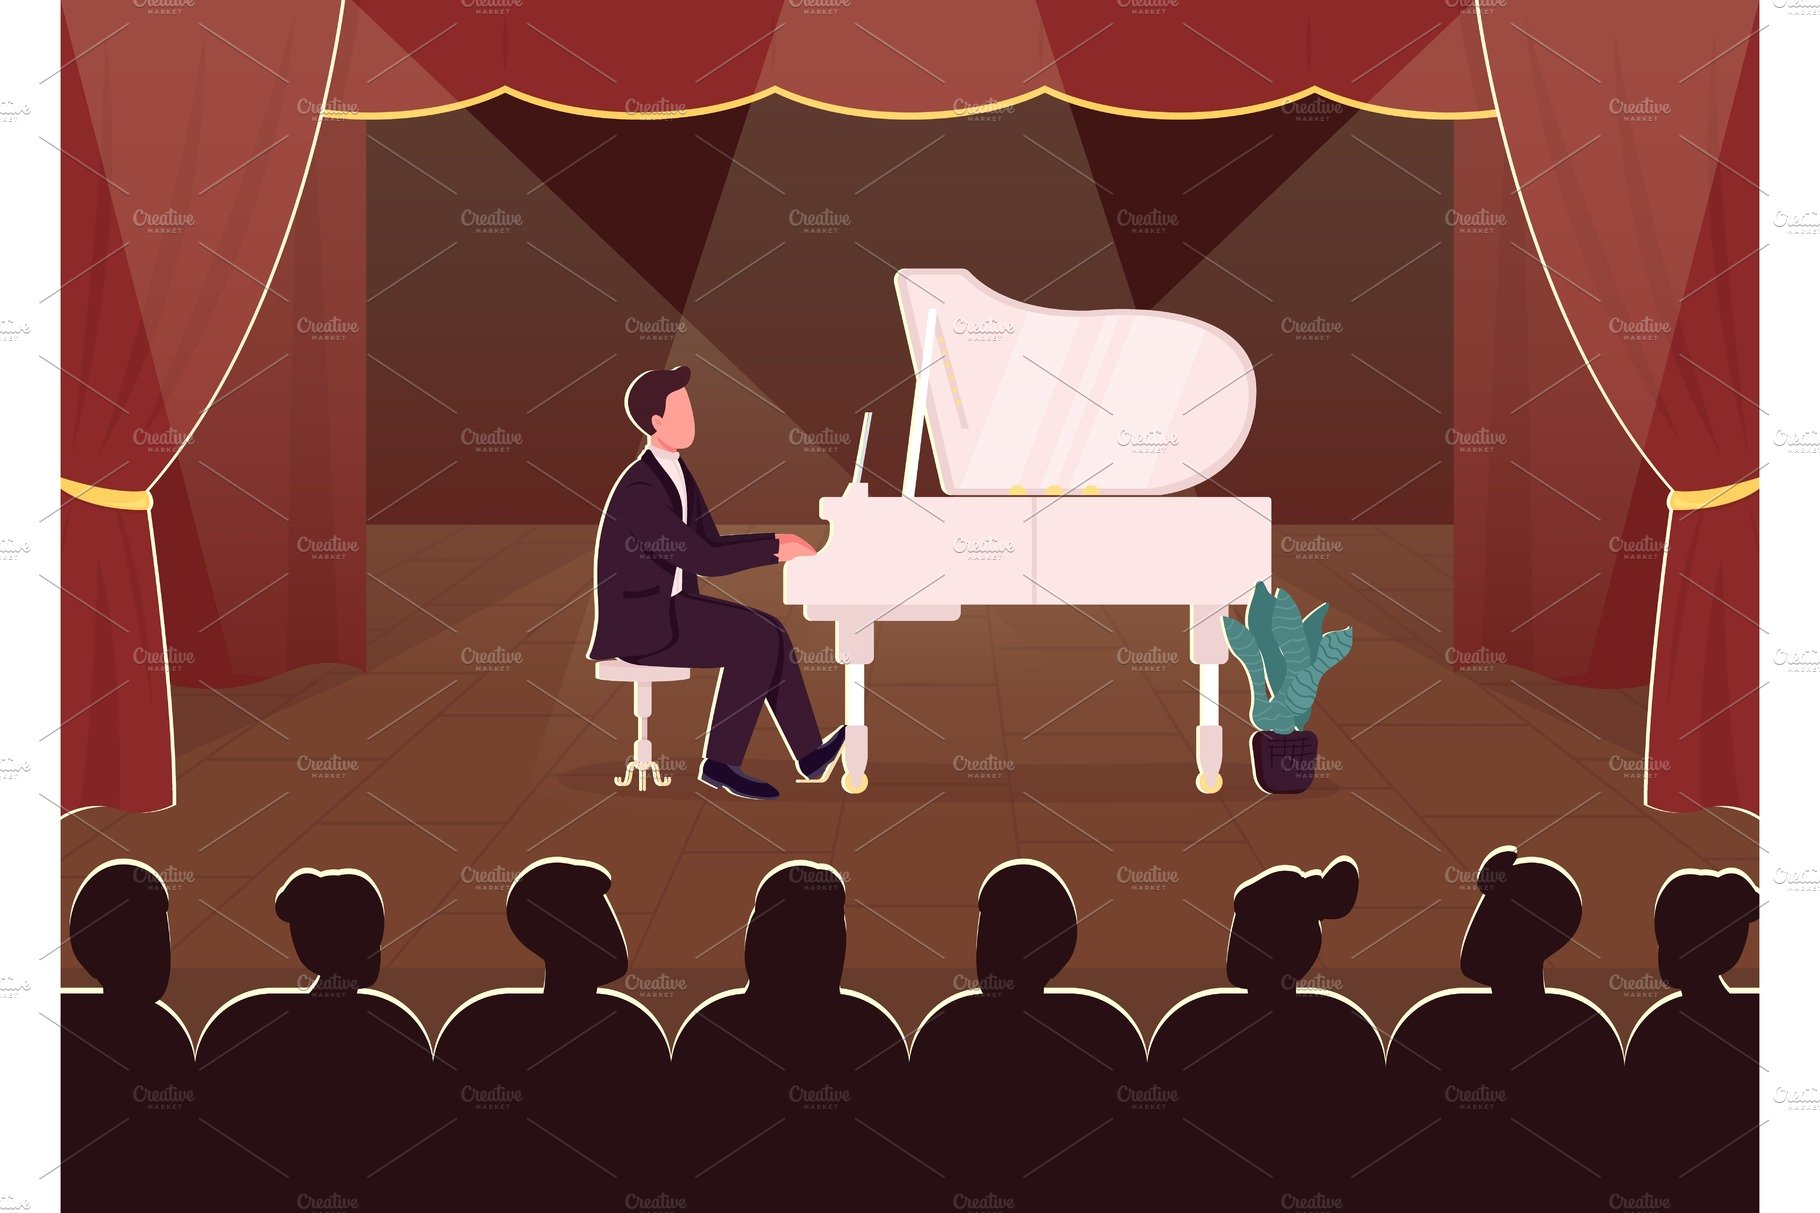 Live piano concert flat illustration cover image.